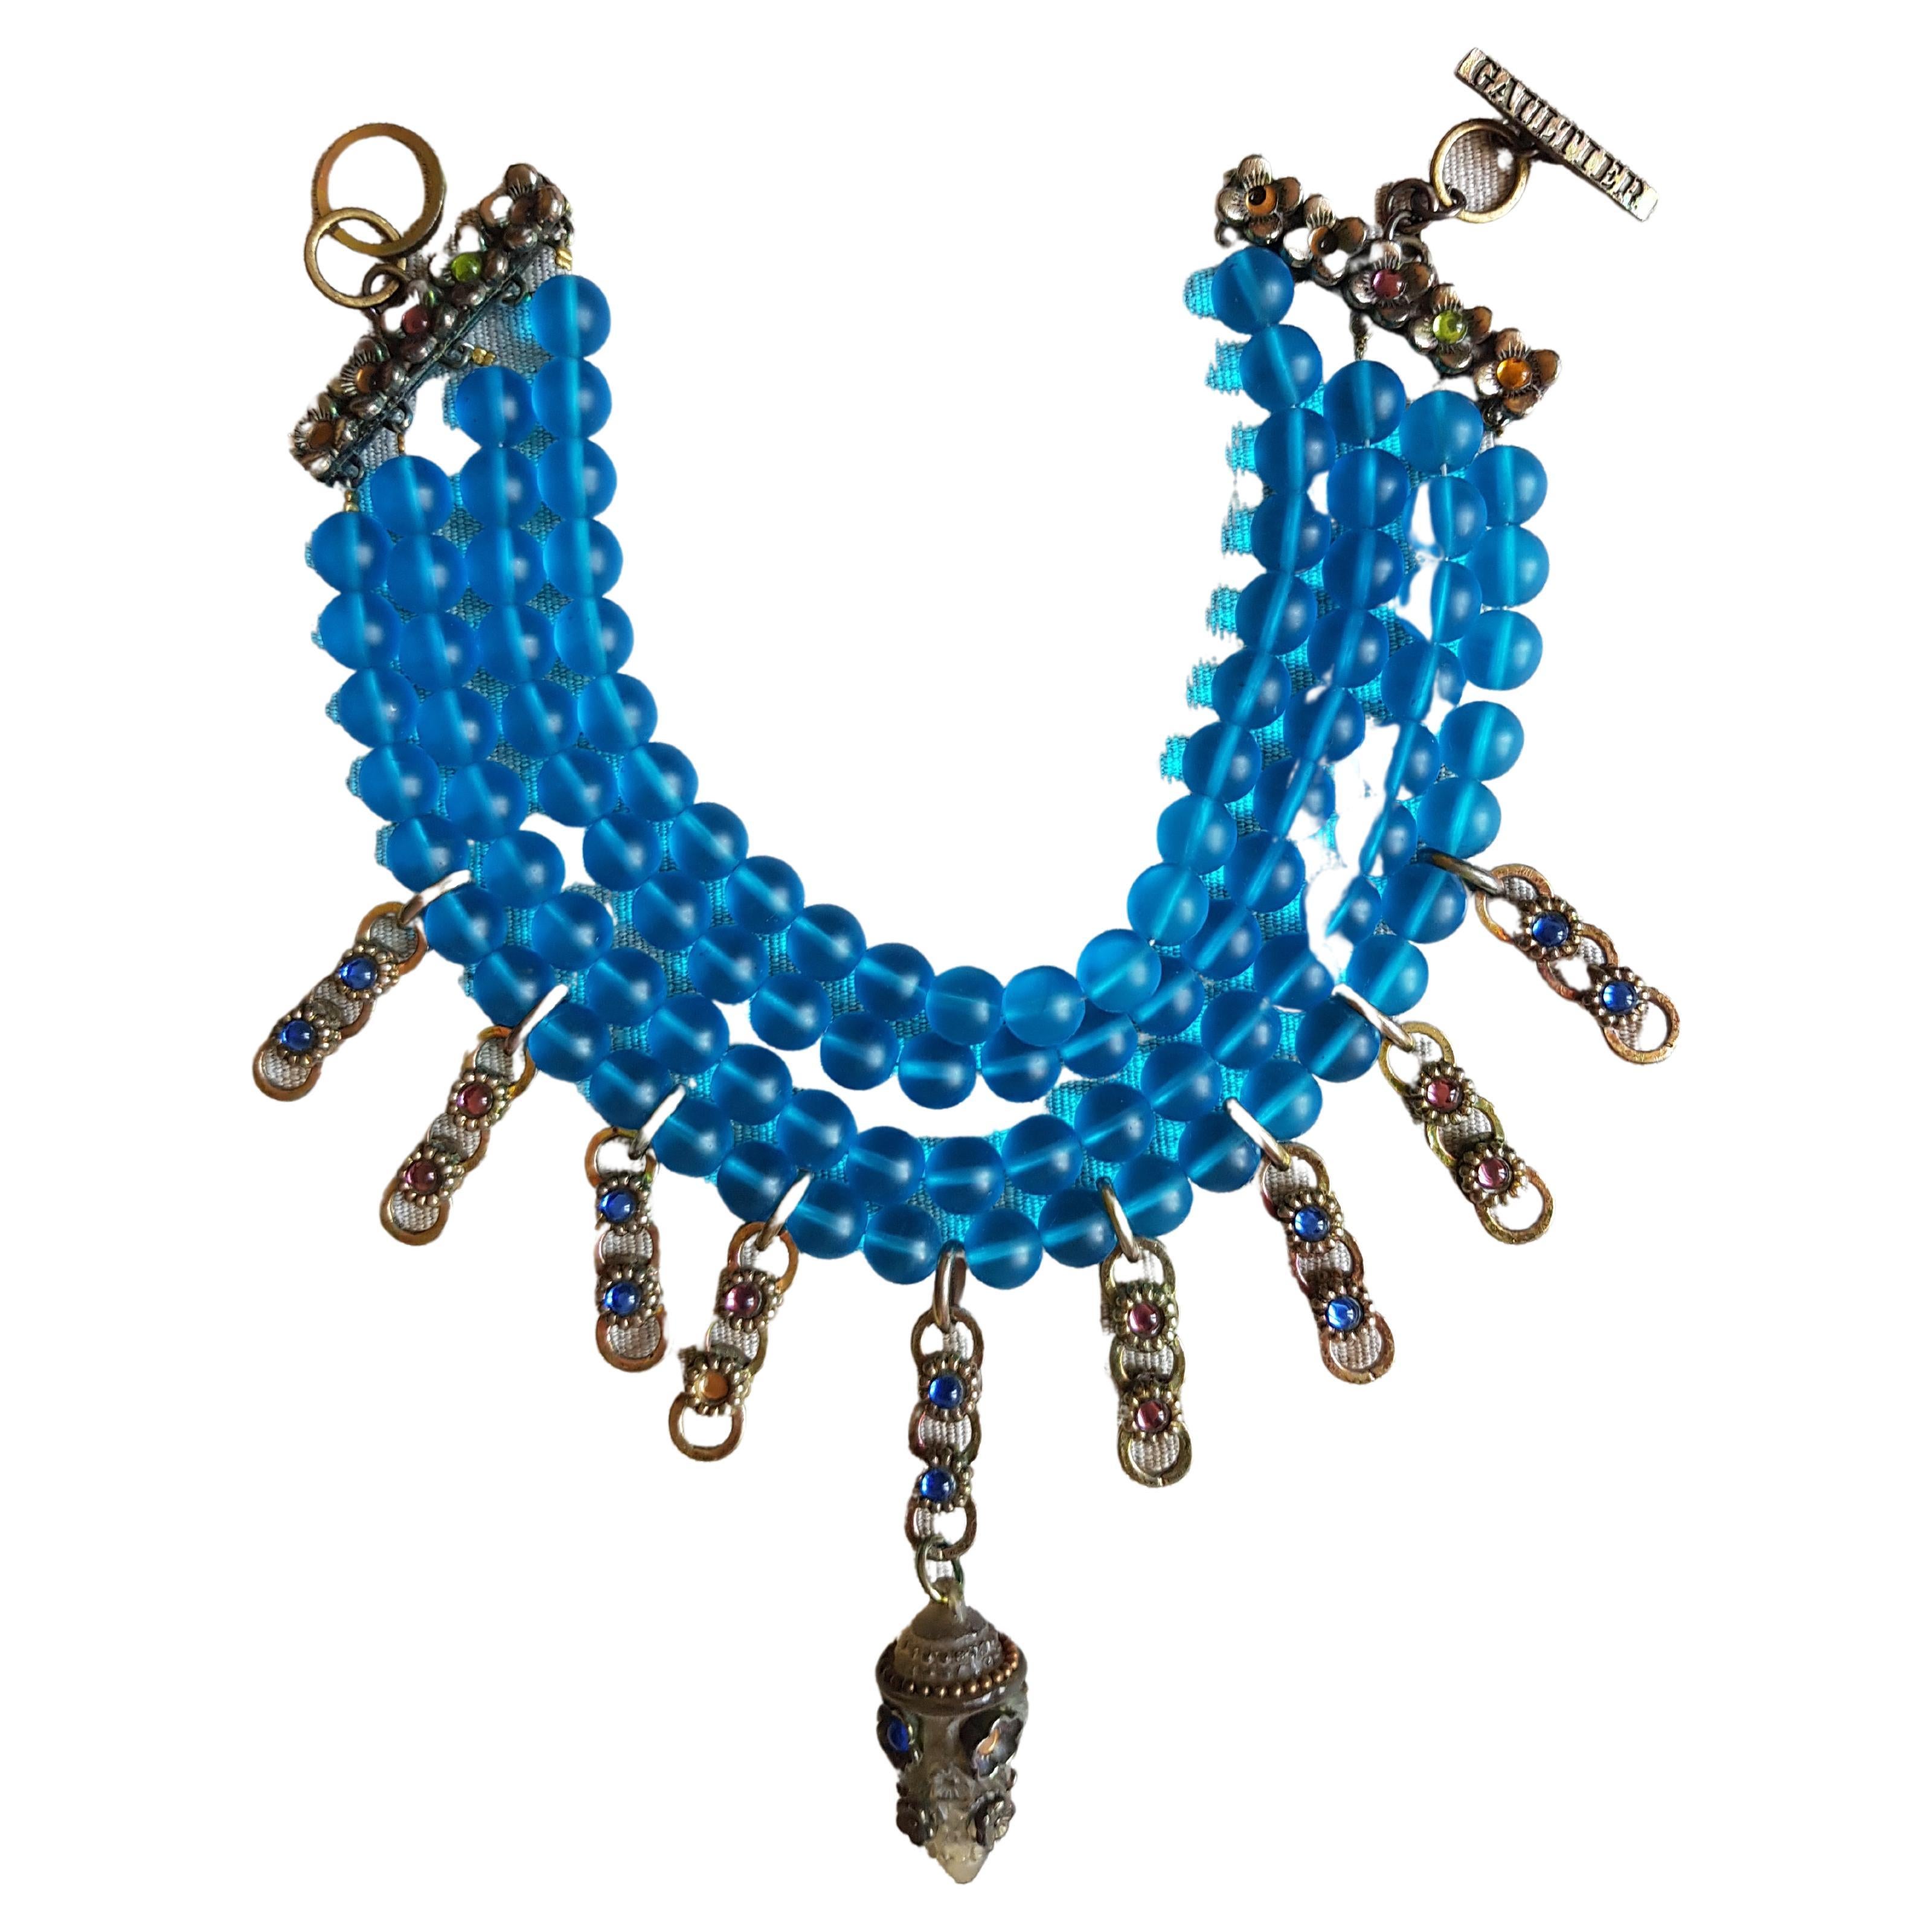 Punk beaded necklace choker by Jean Paul Gaultier most famous and iconic SS 1994 collection, worn by Rossy de Palma on runway.
- Turquoise frosted glass beads
- Gradual multi row
- Hooks and closing ring
- Signature Jean Paul Gaultier
- SS 1994
-